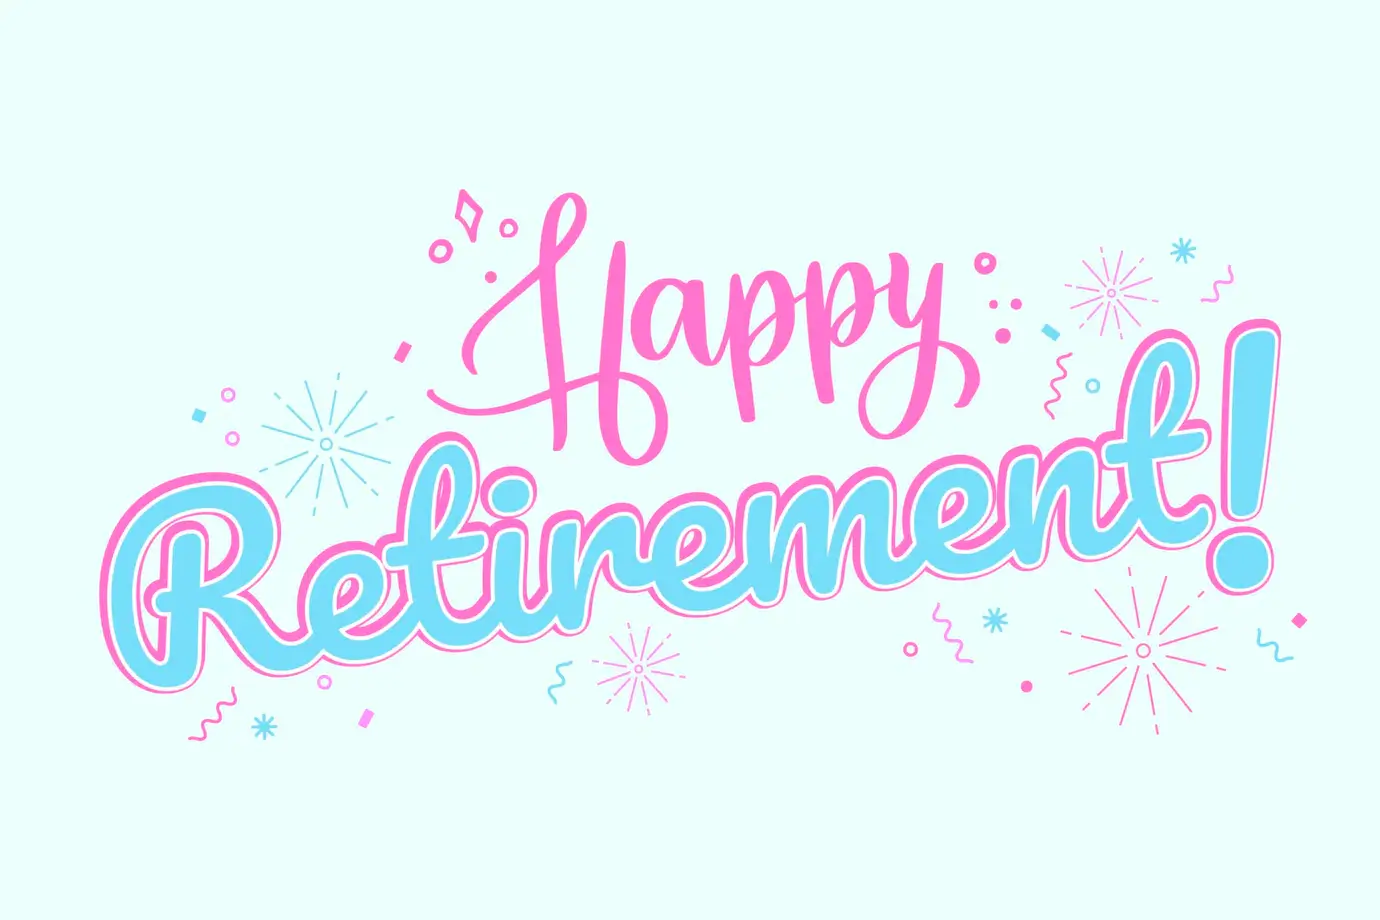 Funny Retirement Quotes - Funny Quotes about Retirement to Make the Retiree Smiles